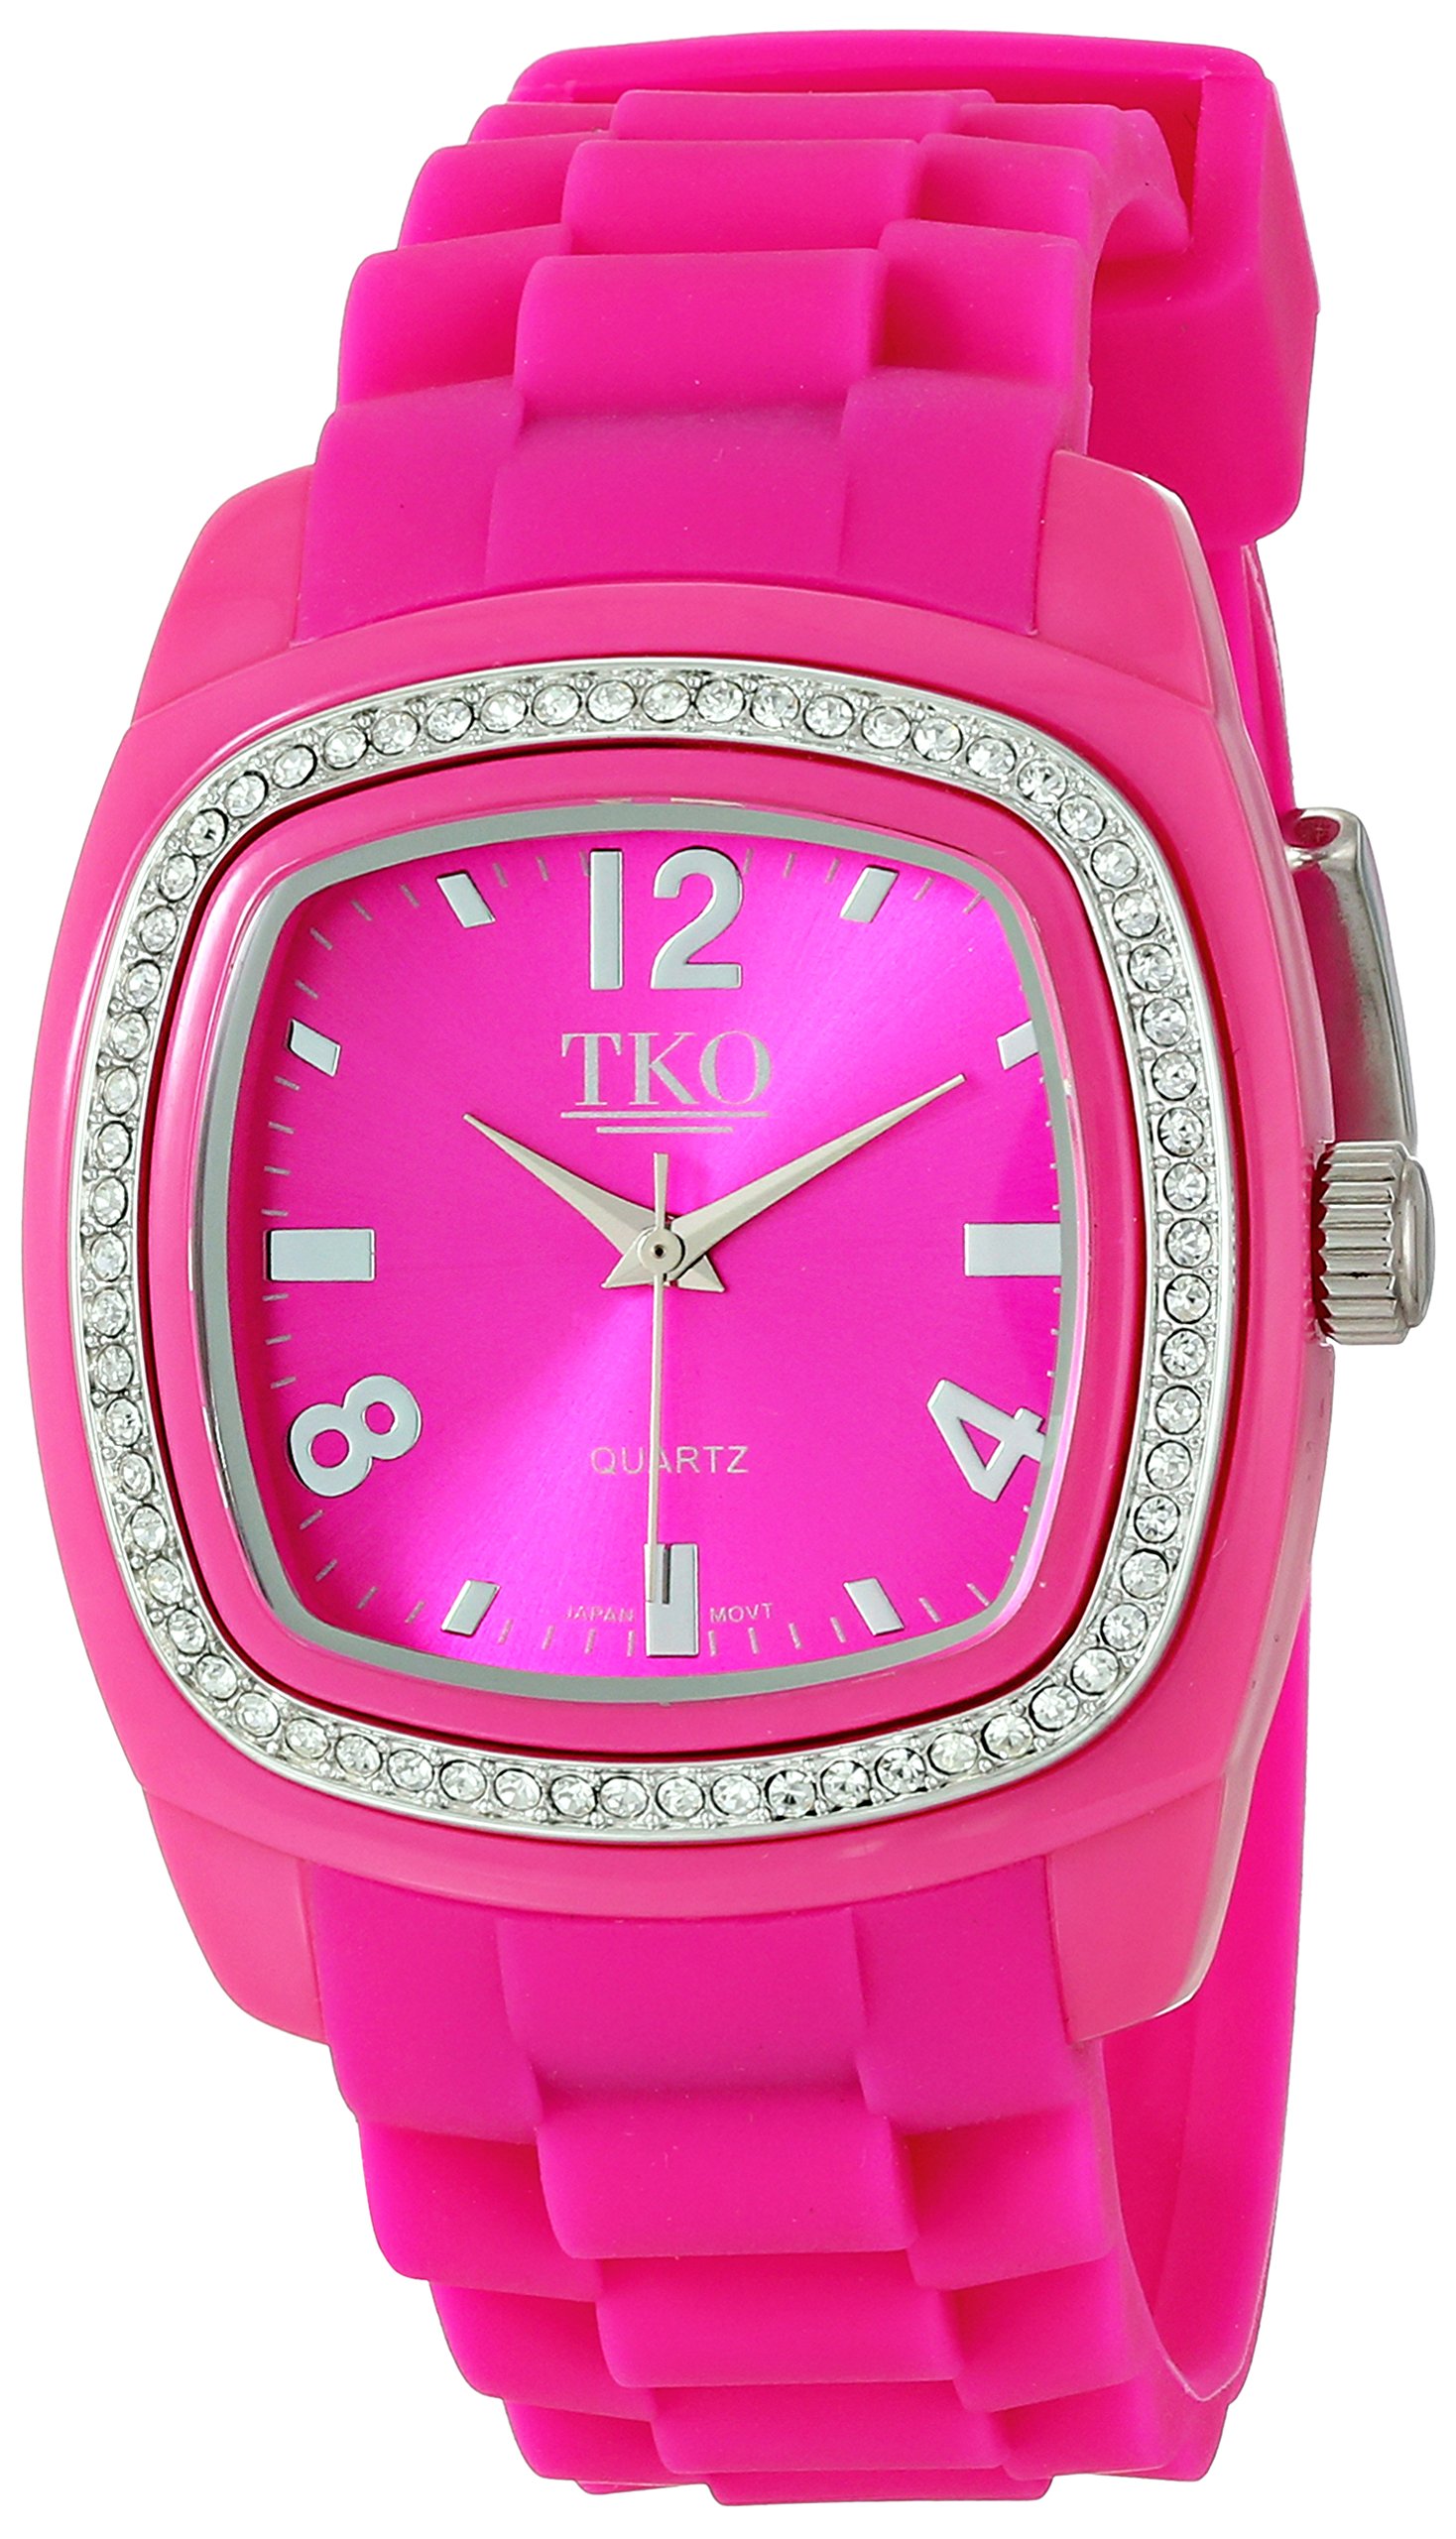 TKO Women Square Wrist Watch with Crystal Accented Bezel and Textured Silicon Rubber Strap